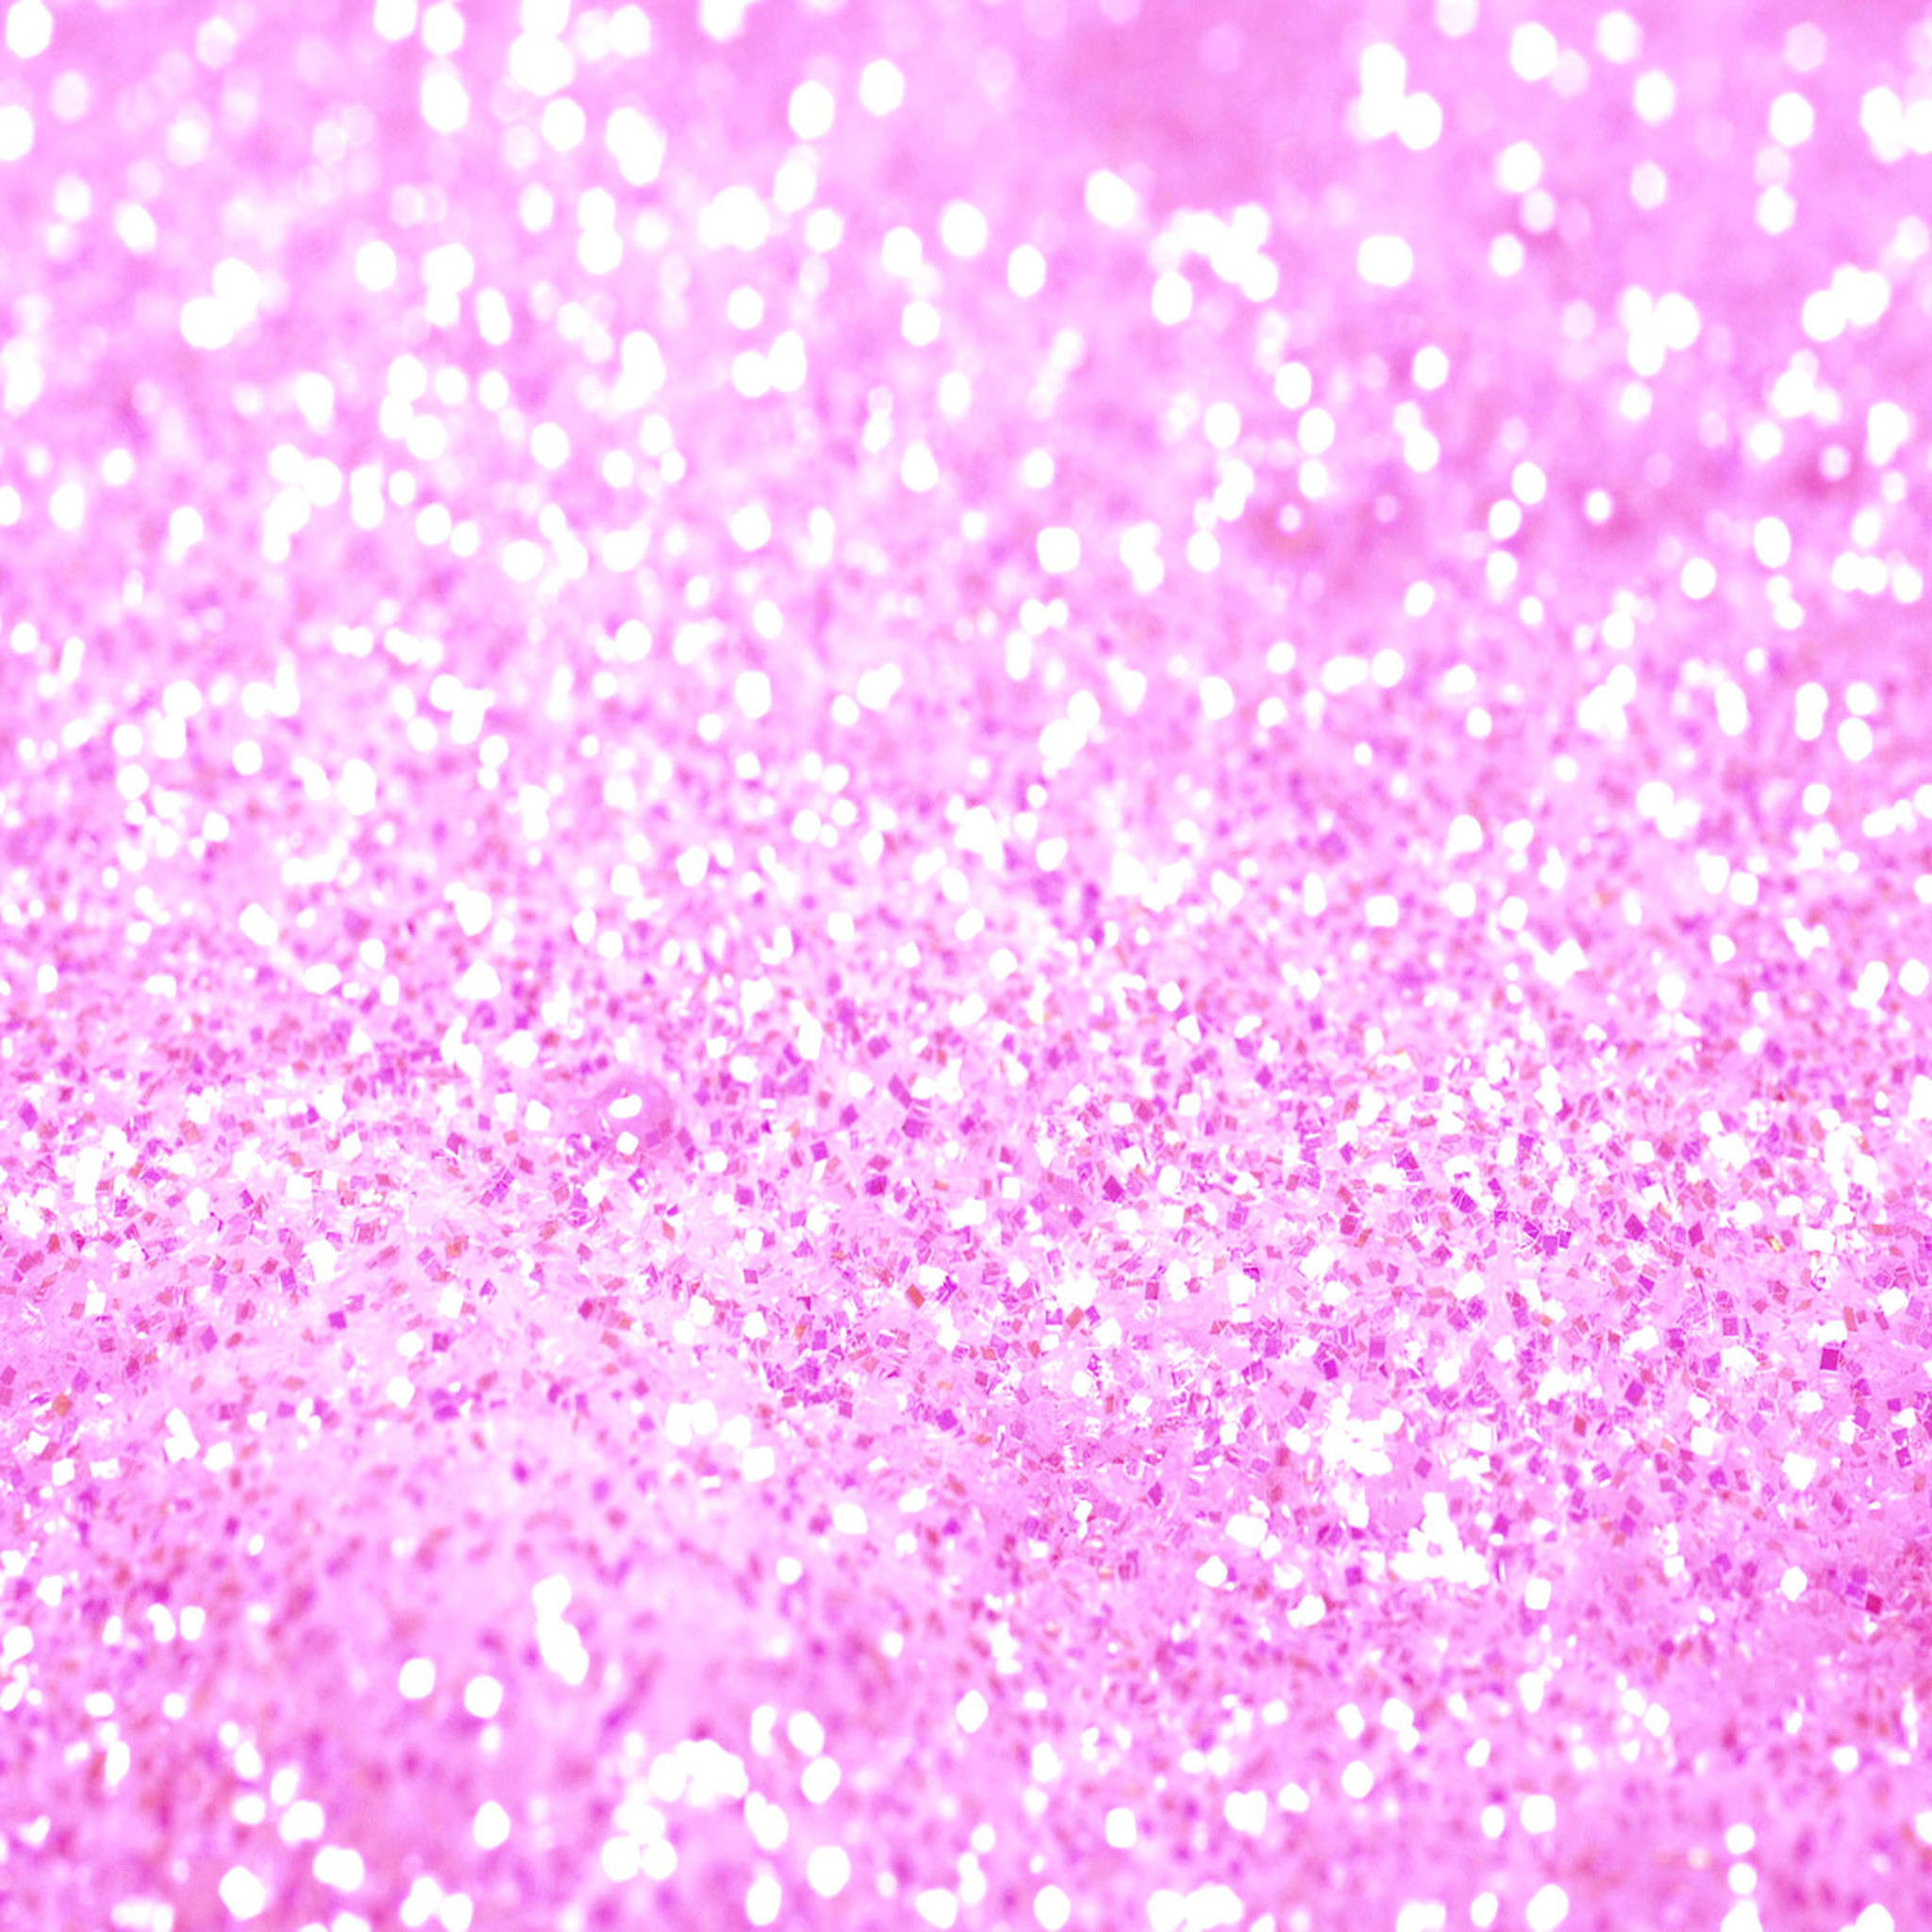 Pink Glitter. Tap image for more glitter wallpapers for iPhone, iPad Android